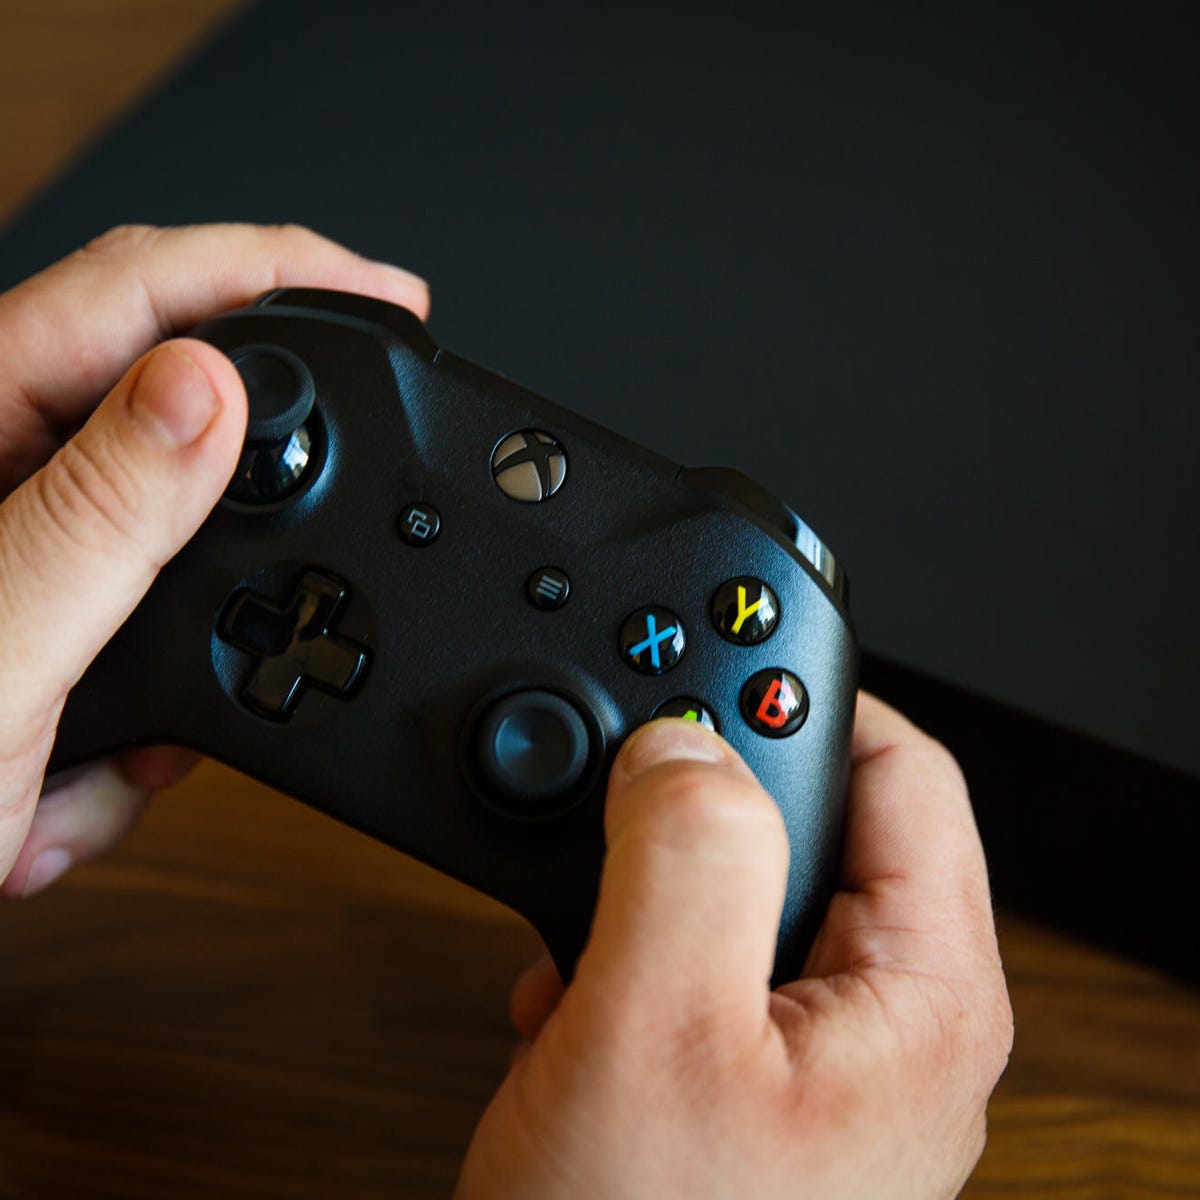 Minister Goedaardig zag Microsoft Xbox One X review: It's the most powerful console you can buy.  But is that enough? - CNET